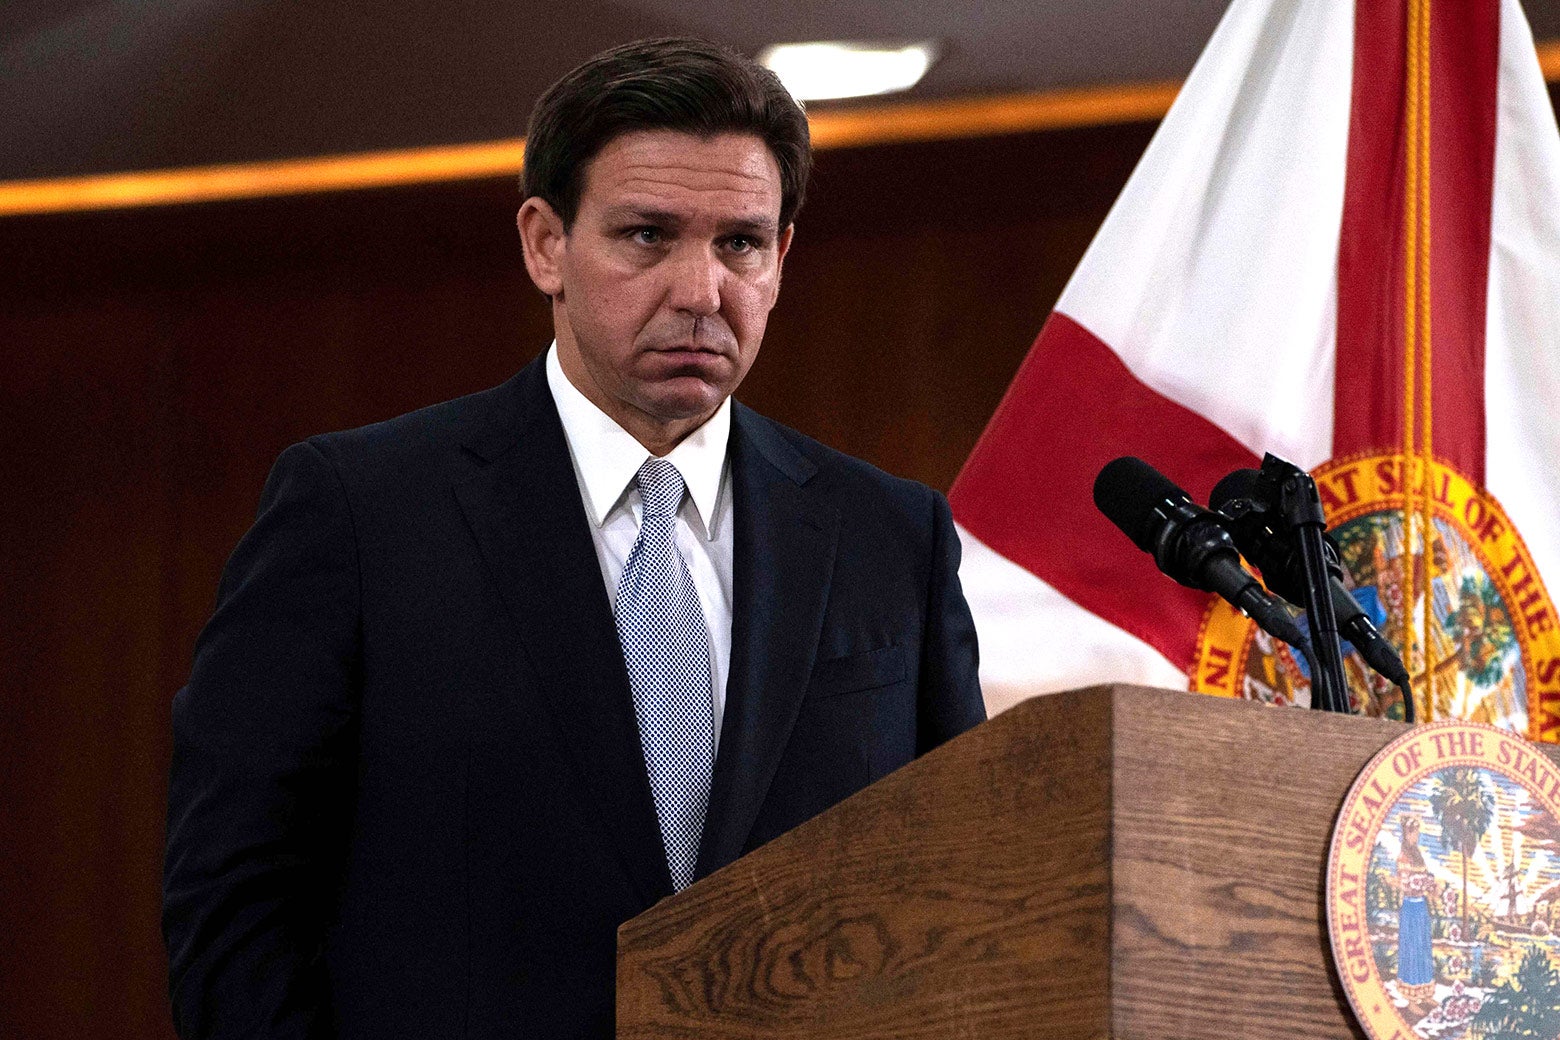 Florida Governor Ron DeSantis standing at a podium with a concerned look on his face, following his "State of the State" address in Florida.